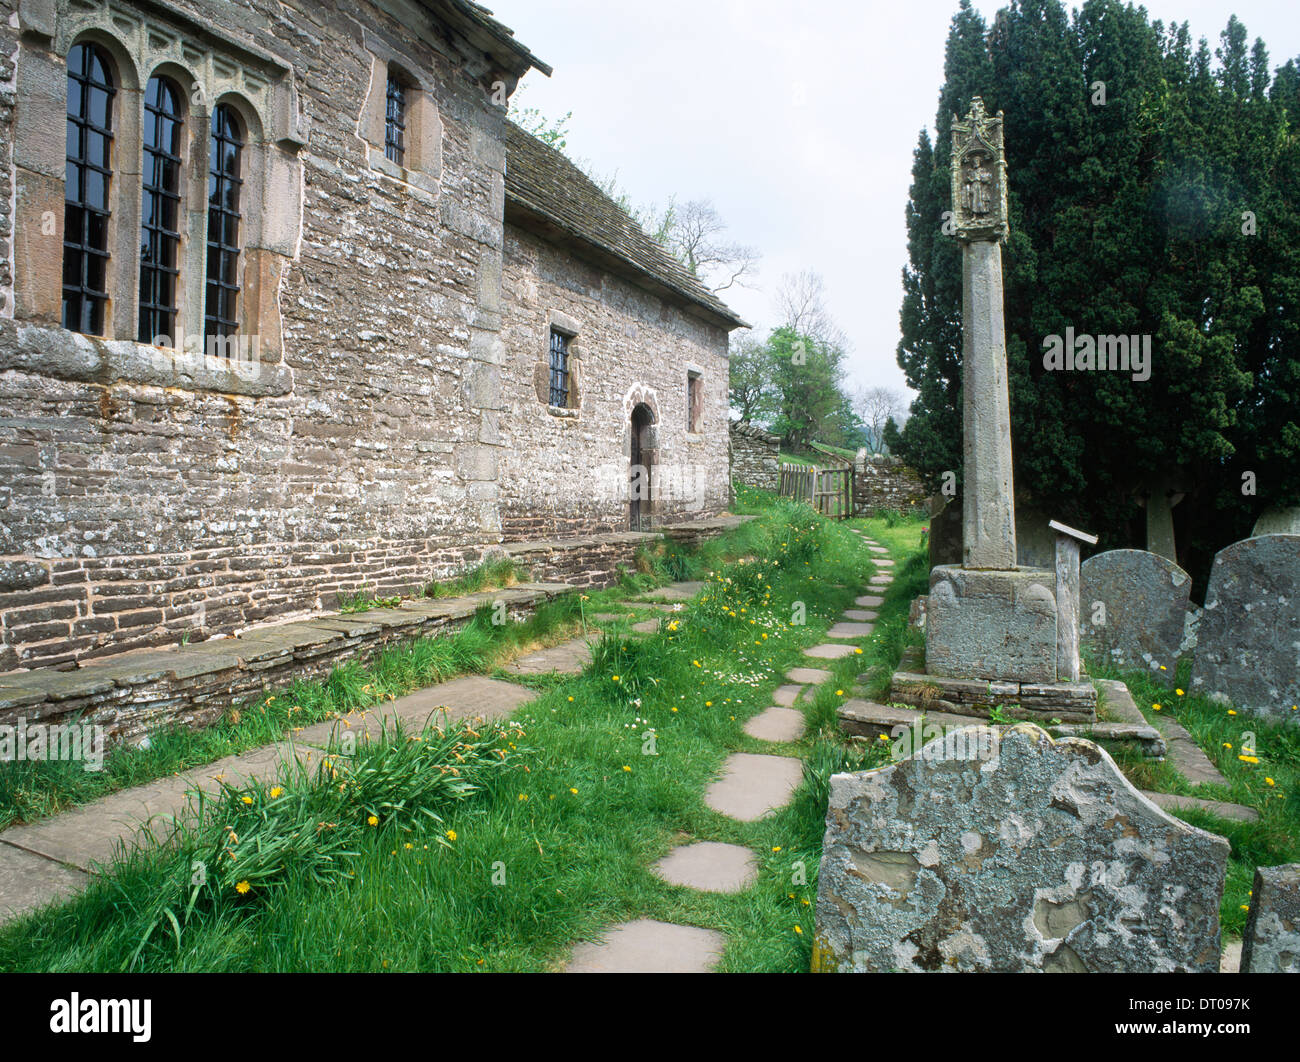 St Issui's church, Partrishow, Powys: churchyard preaching cross opposite stone benches running alongside chancel & nave. Paved Public footpath. Stock Photo